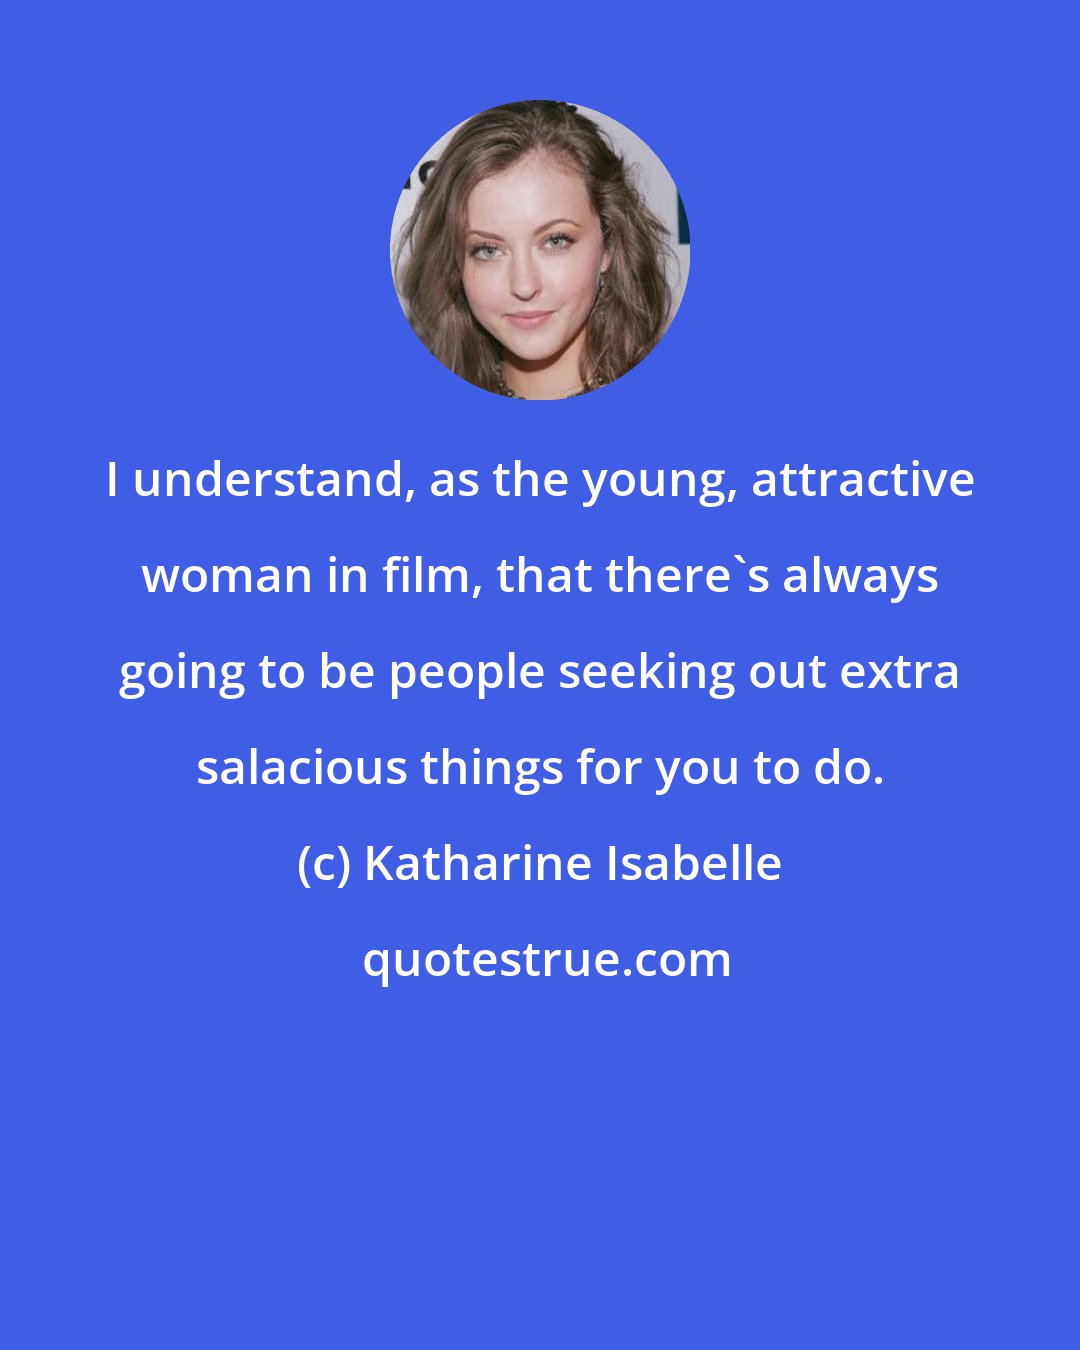 Katharine Isabelle: I understand, as the young, attractive woman in film, that there's always going to be people seeking out extra salacious things for you to do.